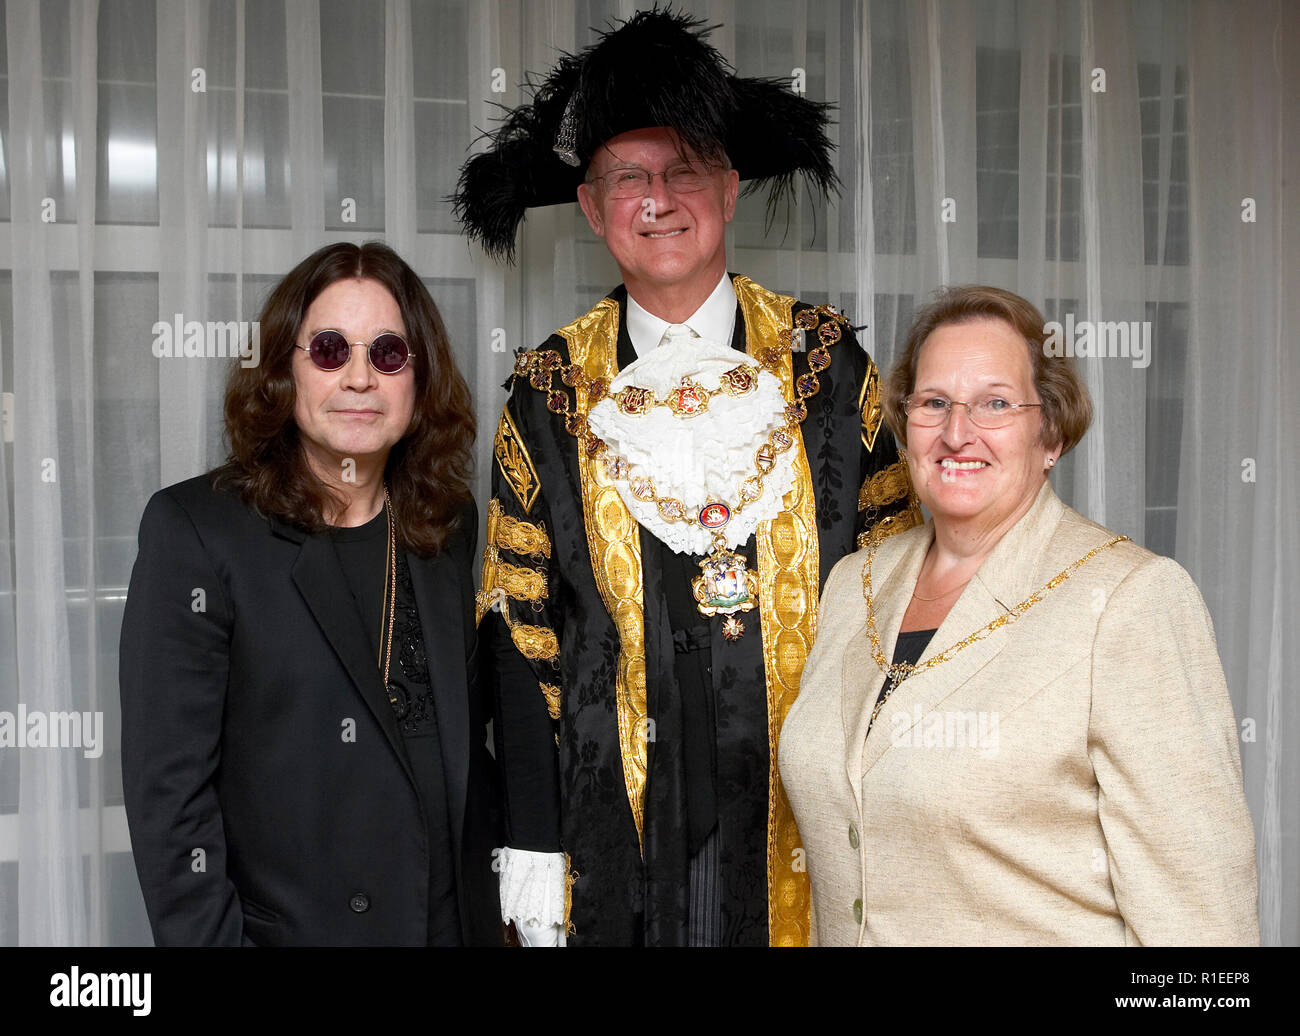 Ozzy Osbourne of Black Sabbath pictured during his visit to Birmingham to receive his walk of stars award in 2007 Stock Photo